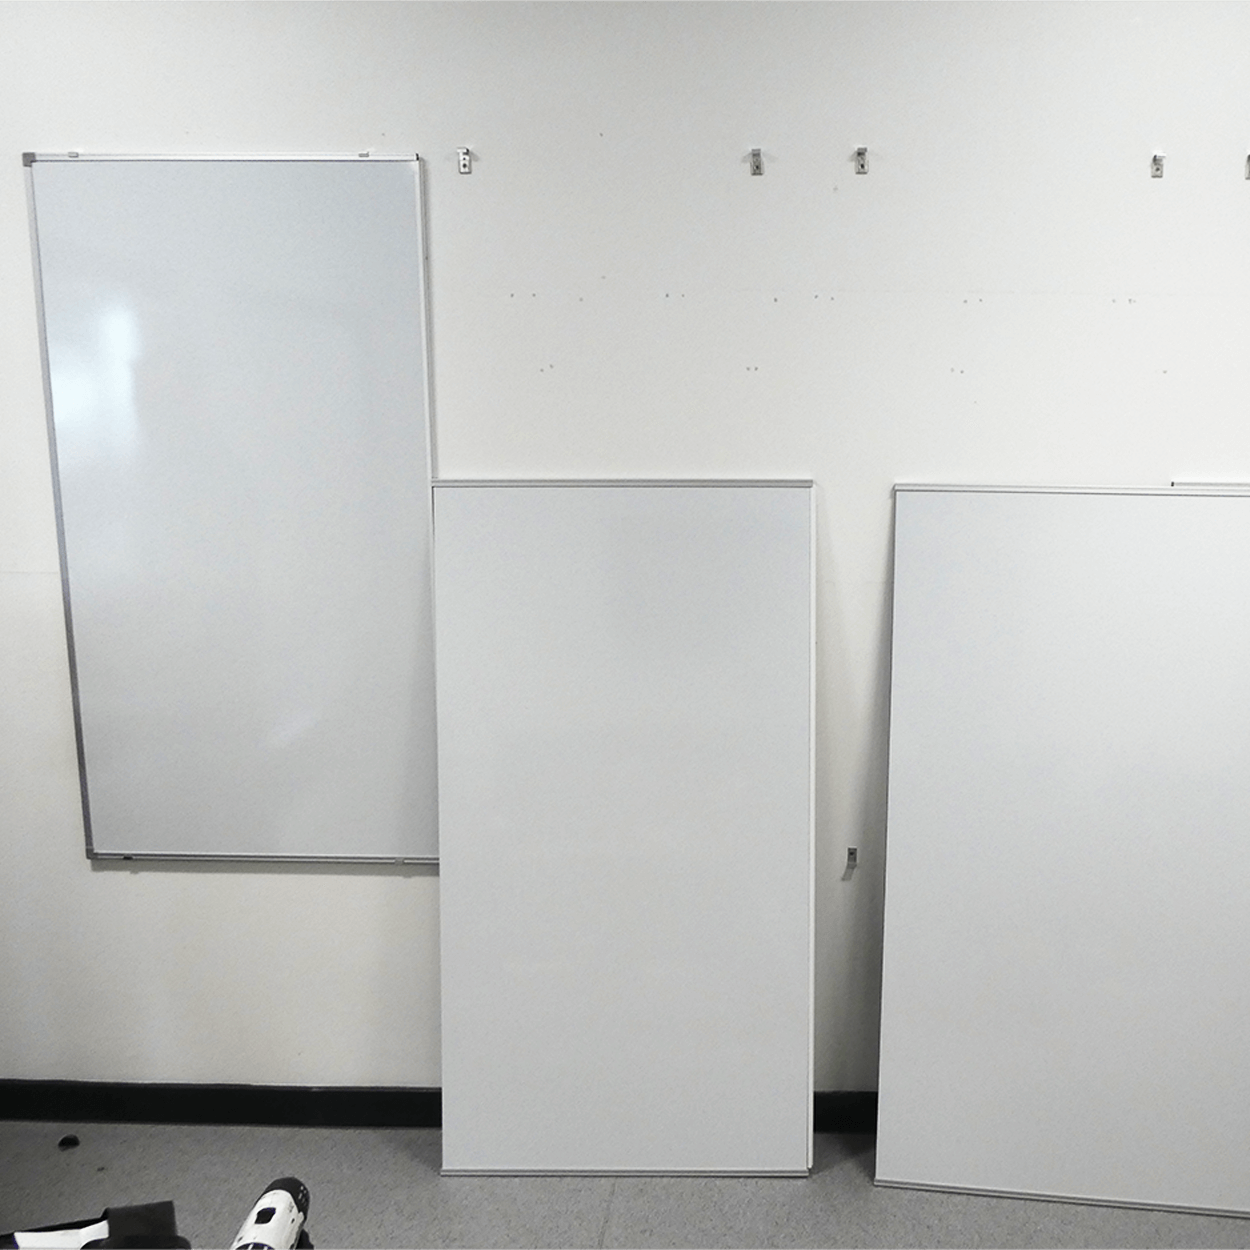 A giant whiteboard for $14 (plus nails)